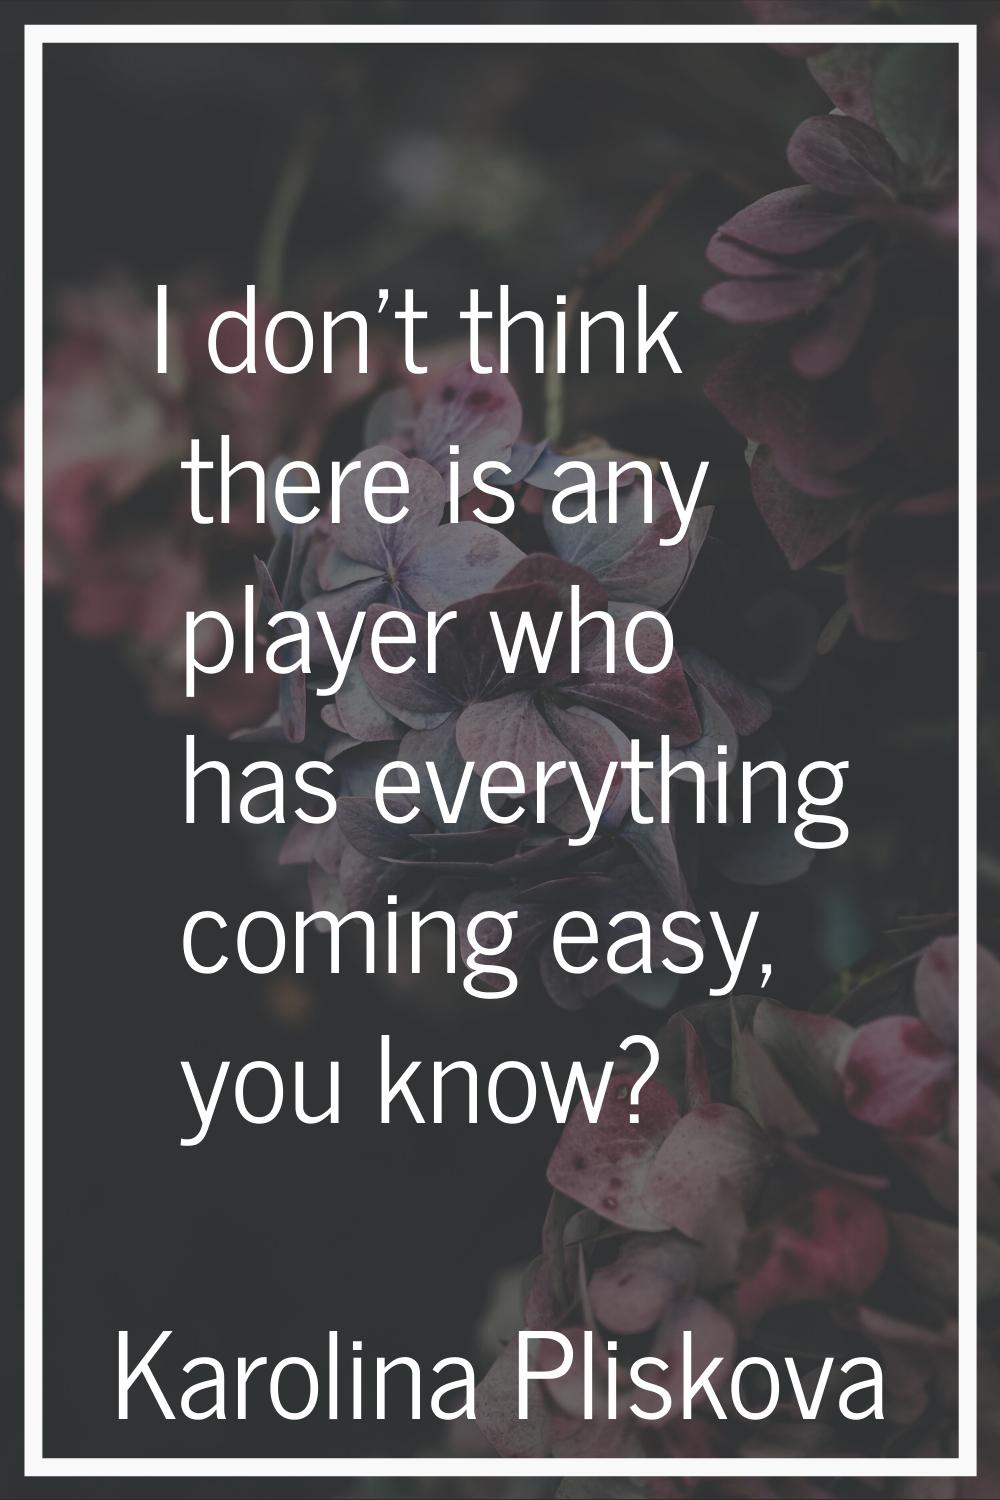 I don't think there is any player who has everything coming easy, you know?